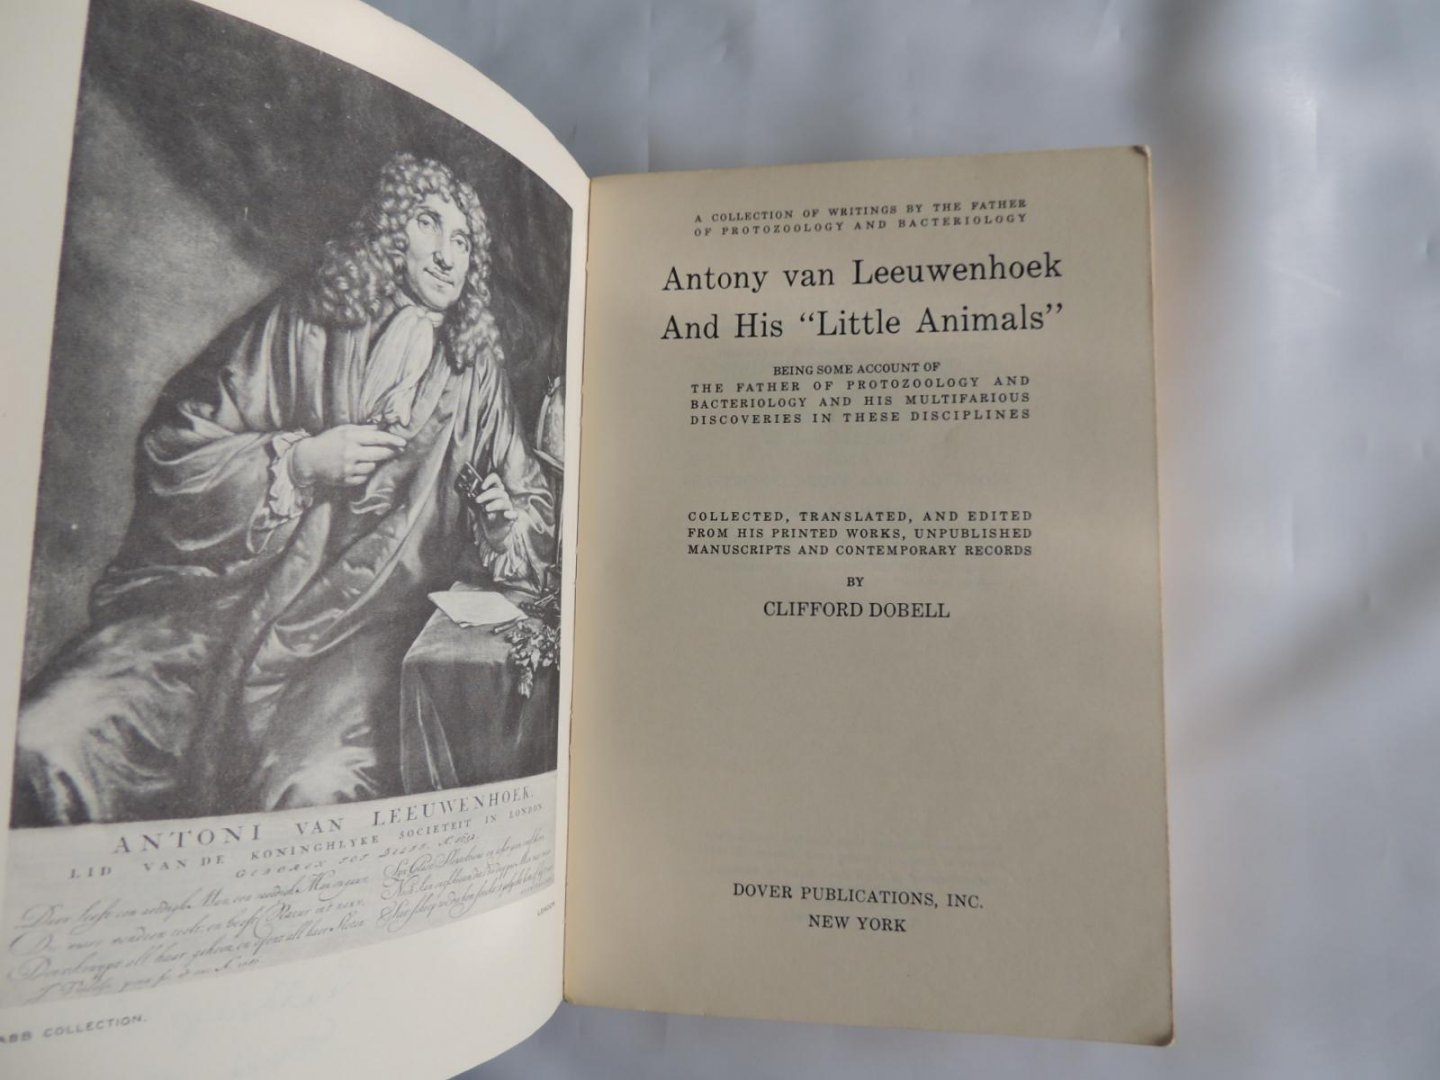 Dobell, Clifford - ANTONY VAN LEEUWENHOEK AND HIS LITTLE ANIMALS  - Being Some Account of the Father of Protozoology and Bacteriology and His Multifarious Discoveries in These Disciplines